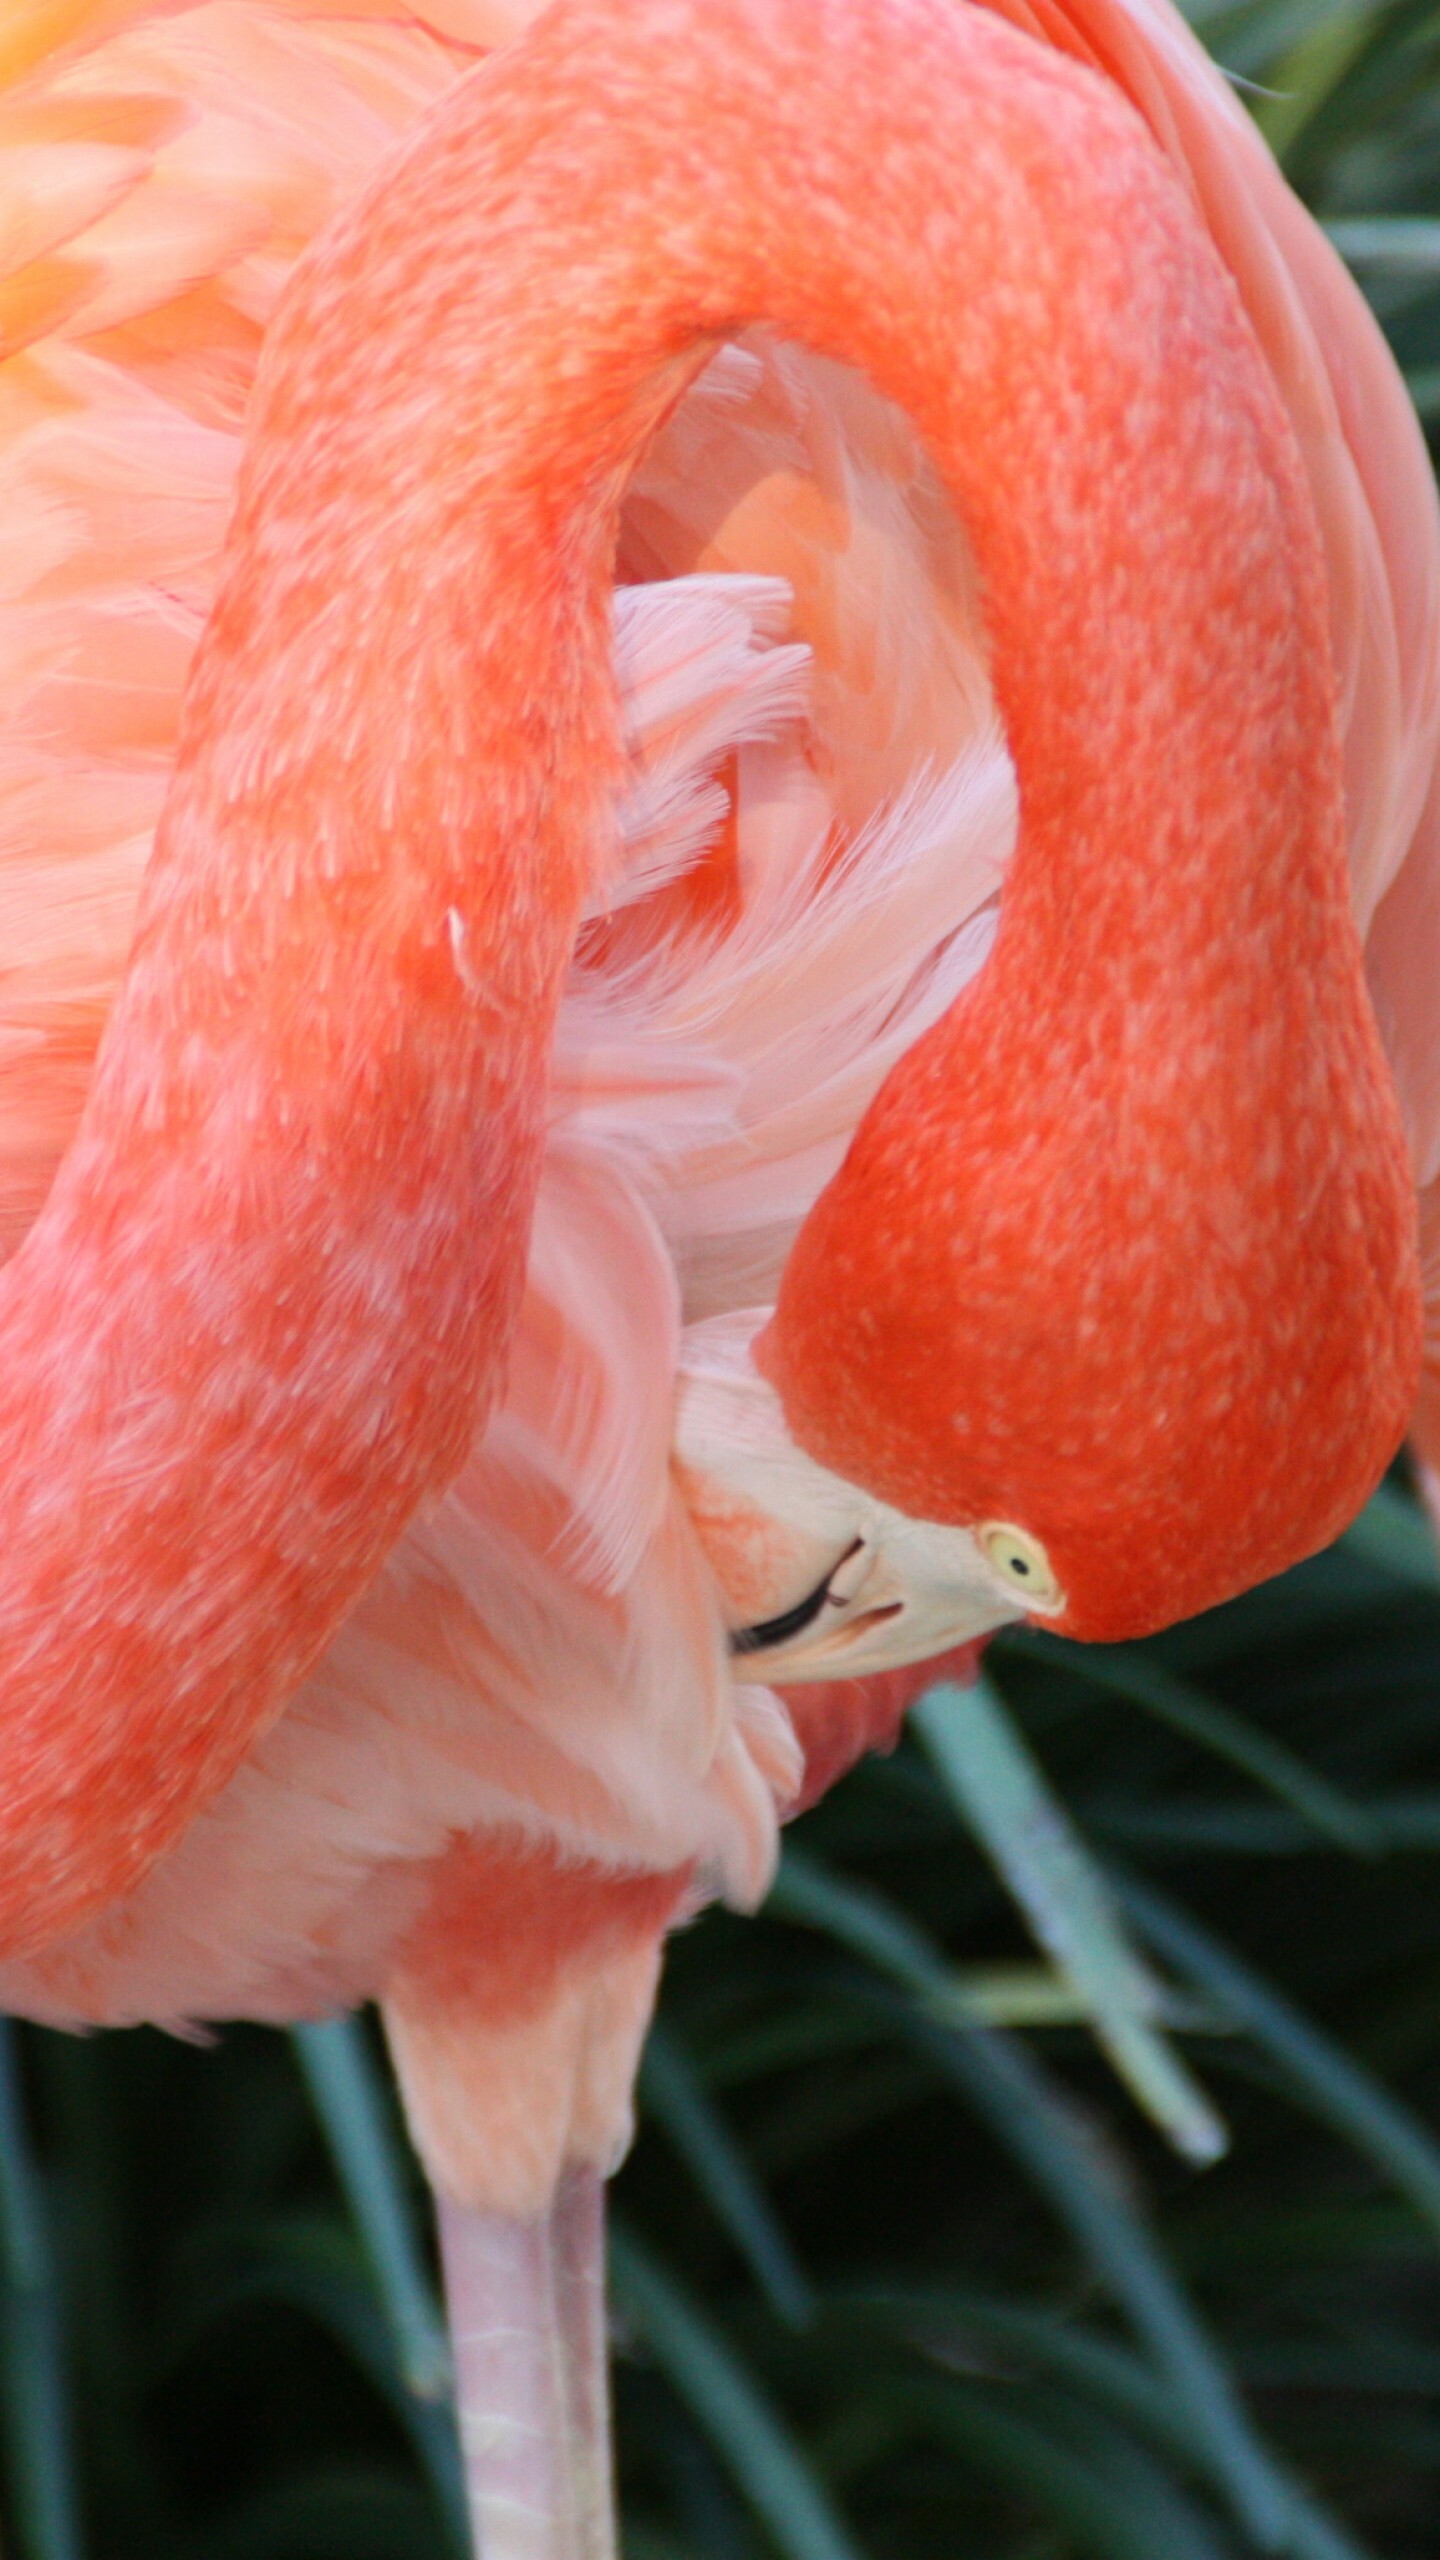 Flamingo: The pink and reddish colors of a flamingo's feathers come from eating pigments found in algae and invertebrates. 1440x2560 HD Wallpaper.